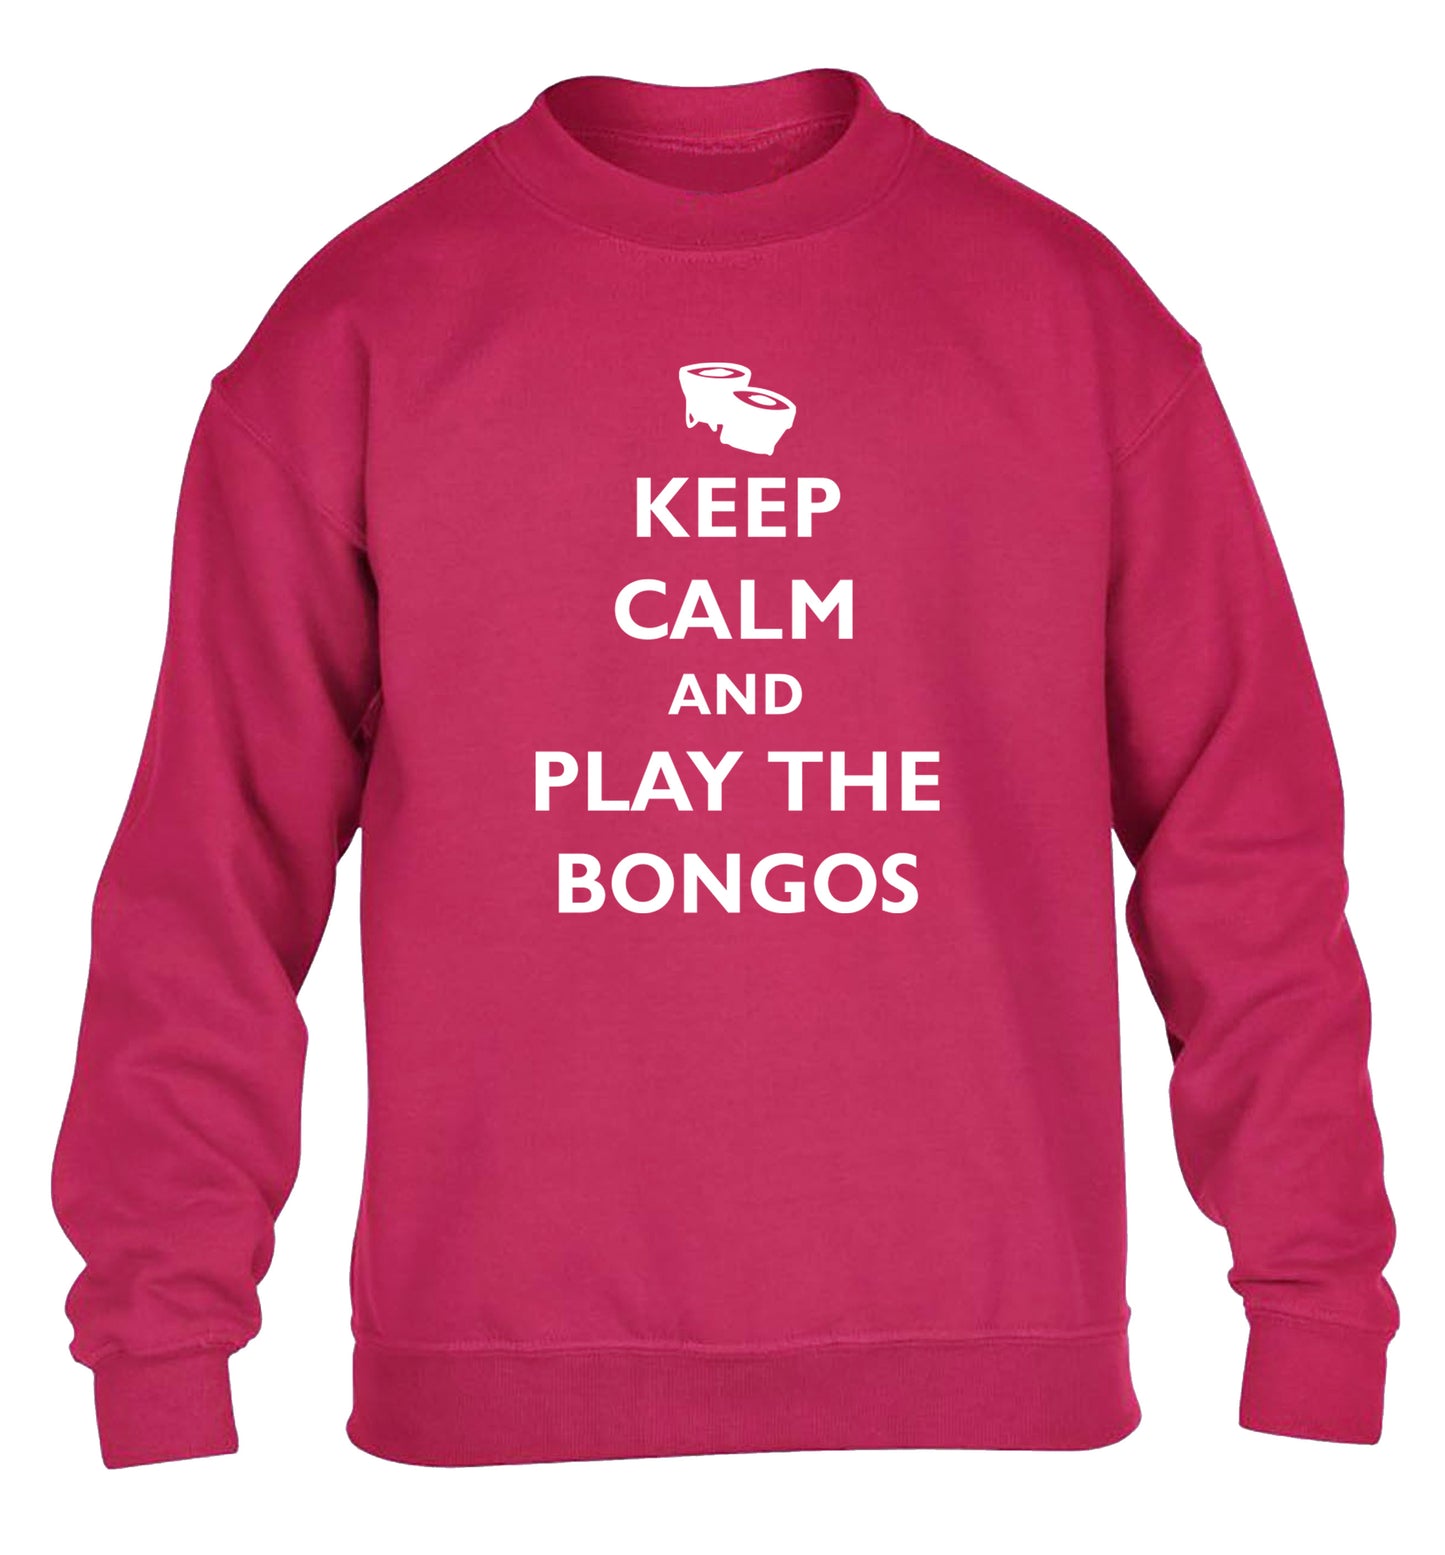 Keep calm and play the bongos children's pink sweater 12-14 Years